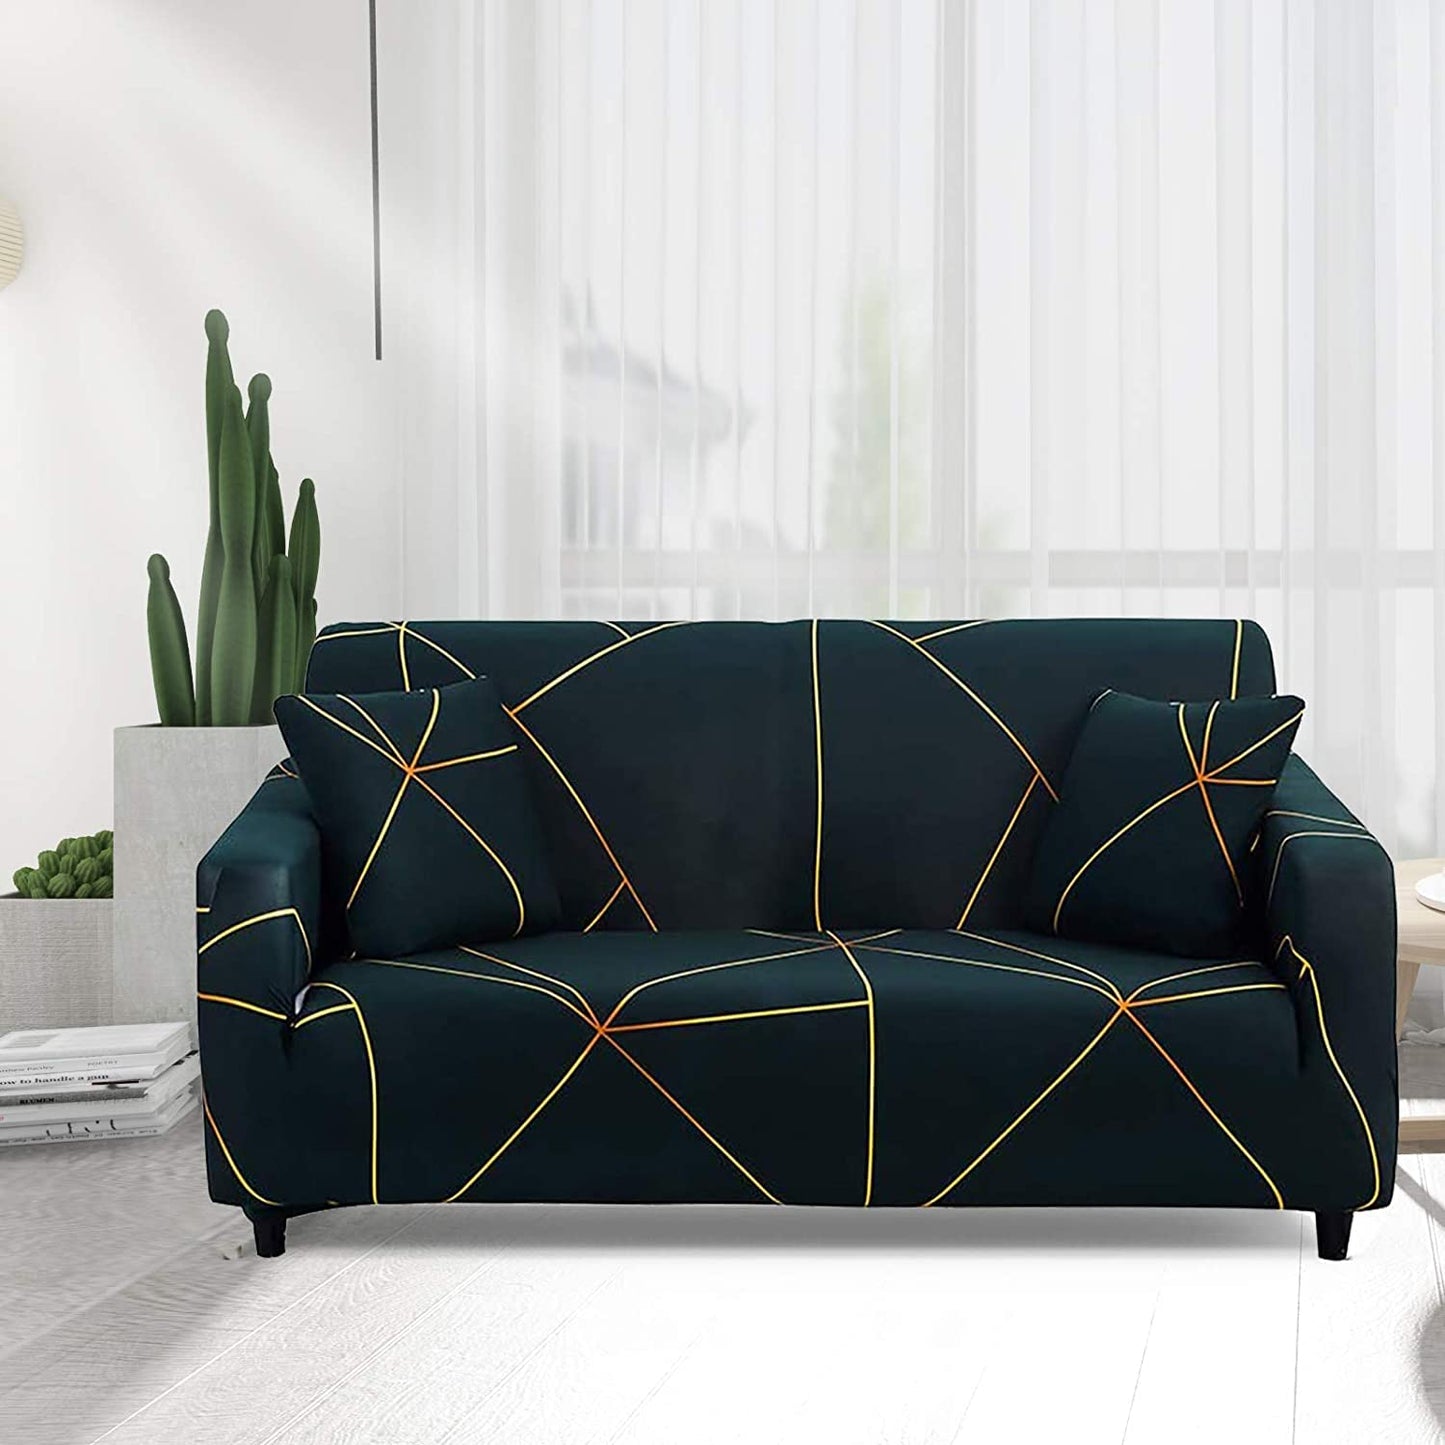 Printed Sofa Cover - Green Gold Prism